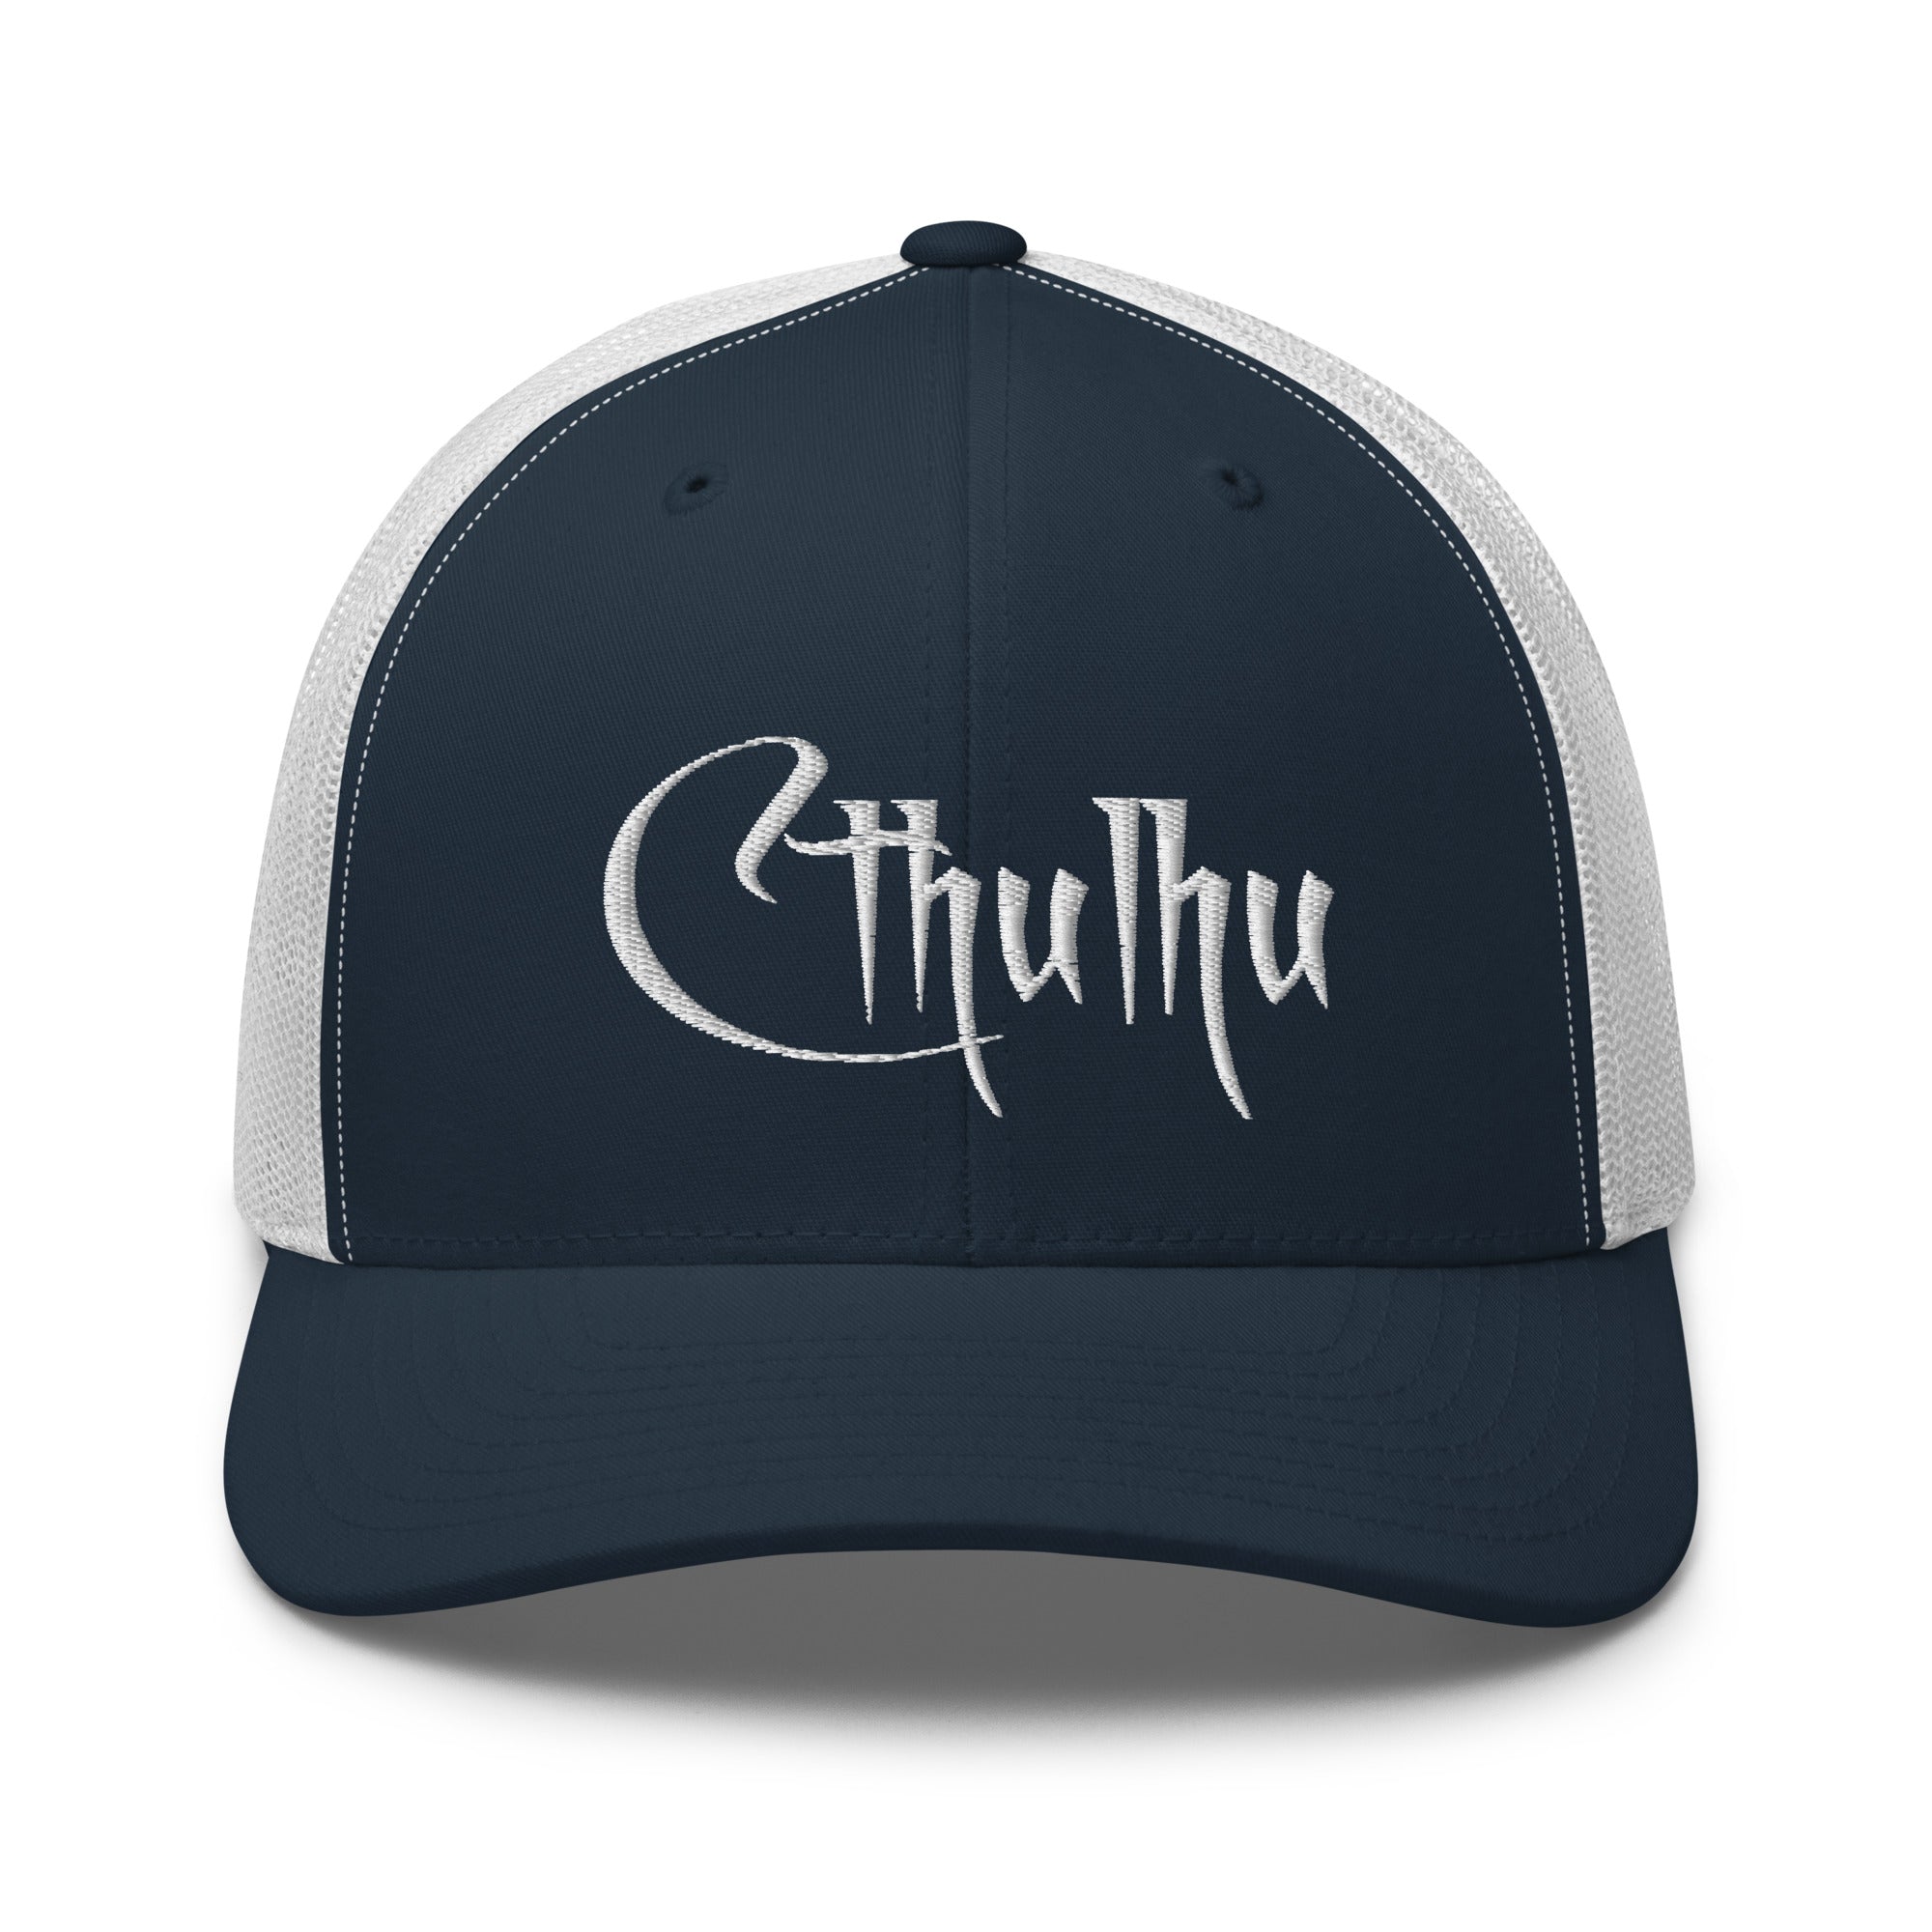 White Call of Cthulhu Great Old Ones Embroidered Trucker Cap Snapback Hat